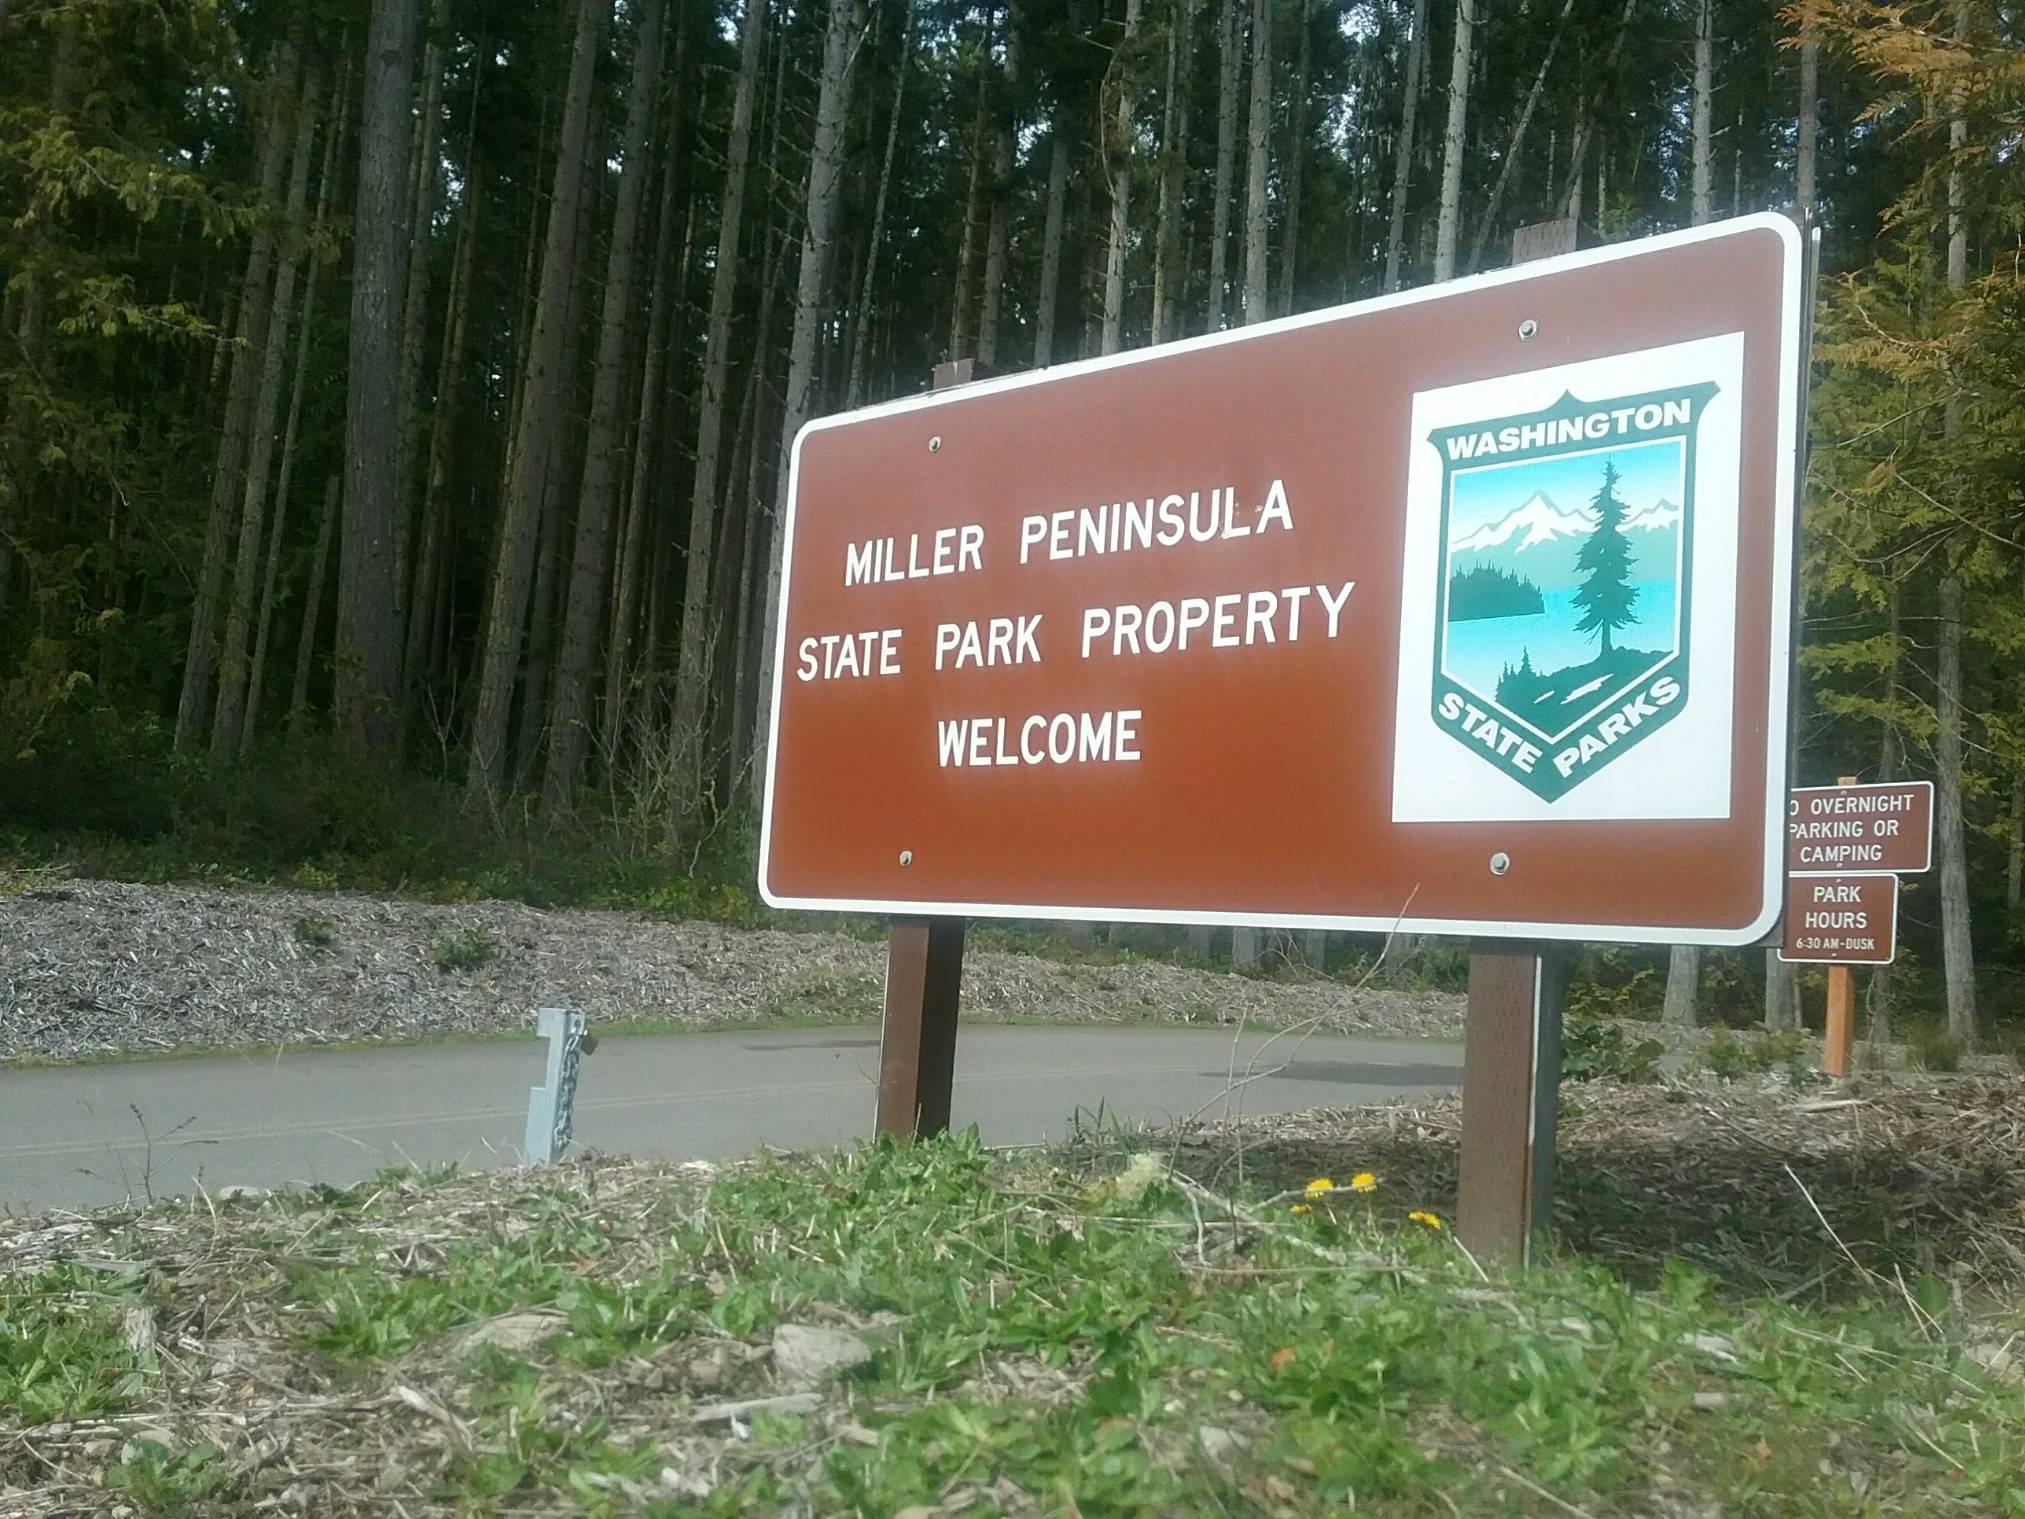 Miller Peninsula State Park, along with other state, county and city parks and wildlife areas, remains closed following Gov.r Jay Inslee’s “Stay Home, Stay Healthy” order. Sequim Gazette photo by Michael Dashiell